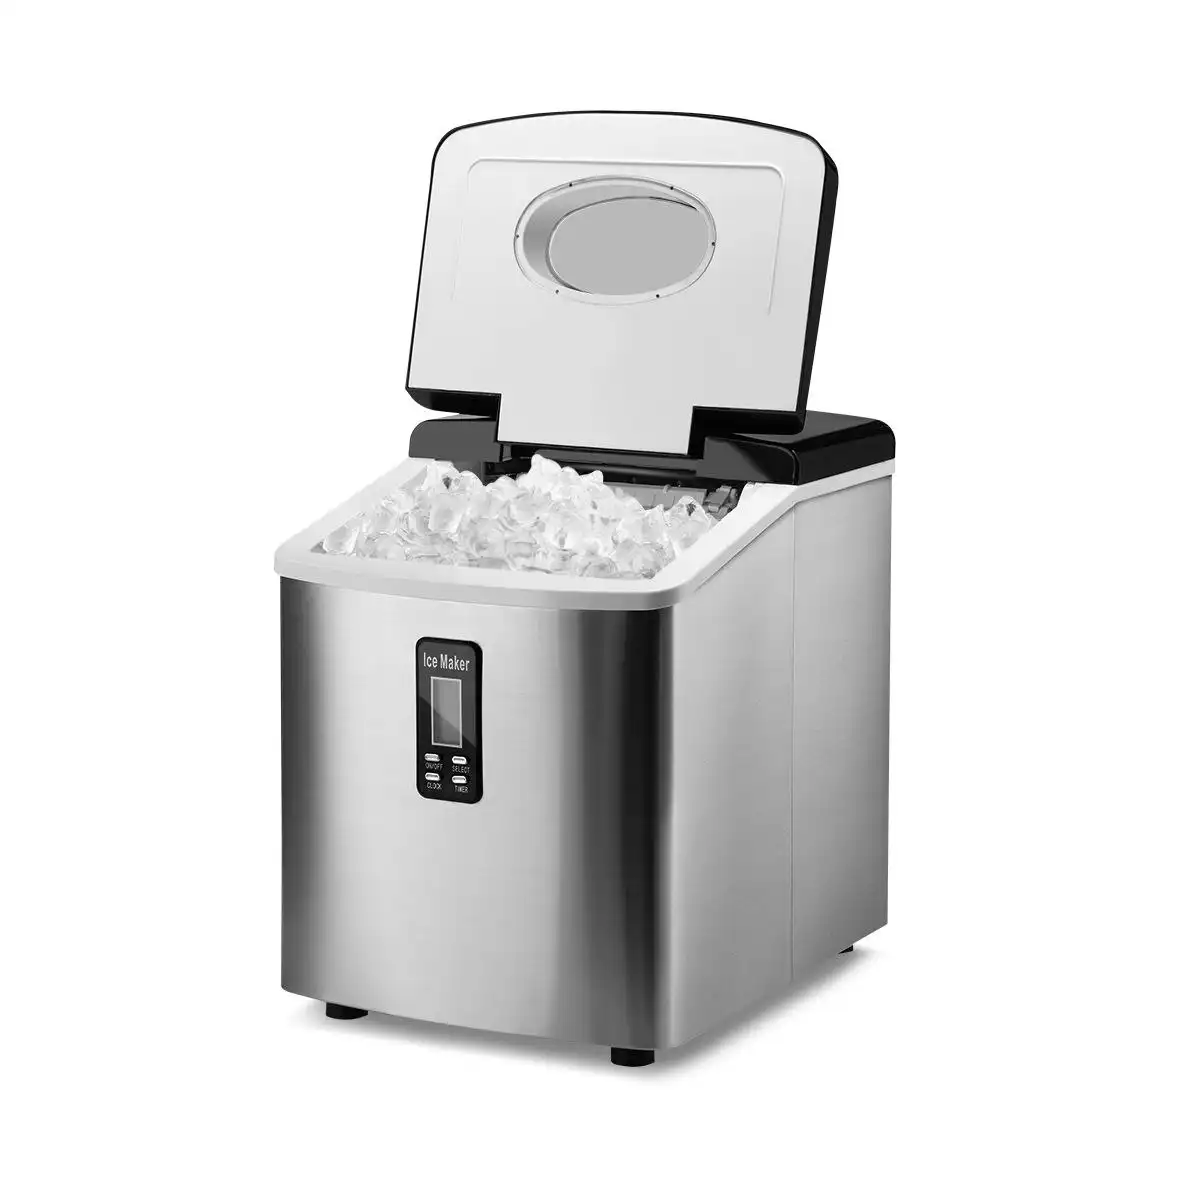 Ausway Silver Ice Maker for Home 3.2L